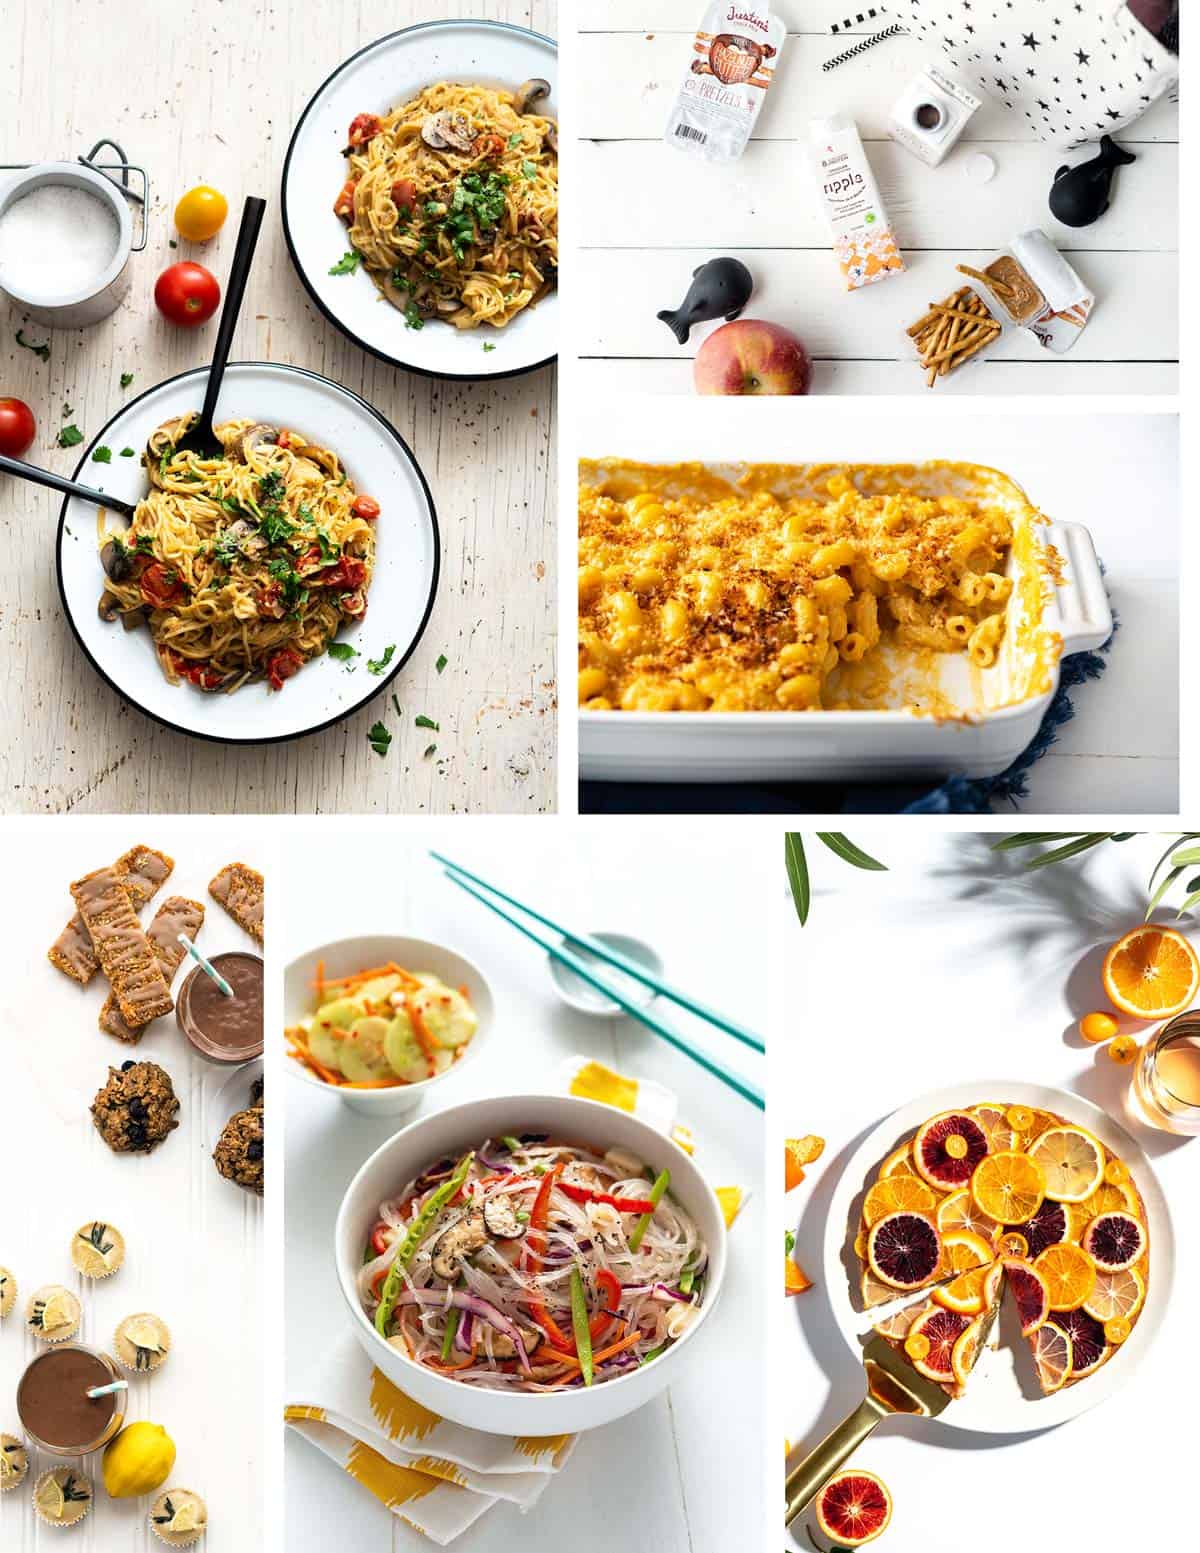 Plant-based & Vegan Food Photography and Styling done by Jackie Sobon of Vegan Yack Attack